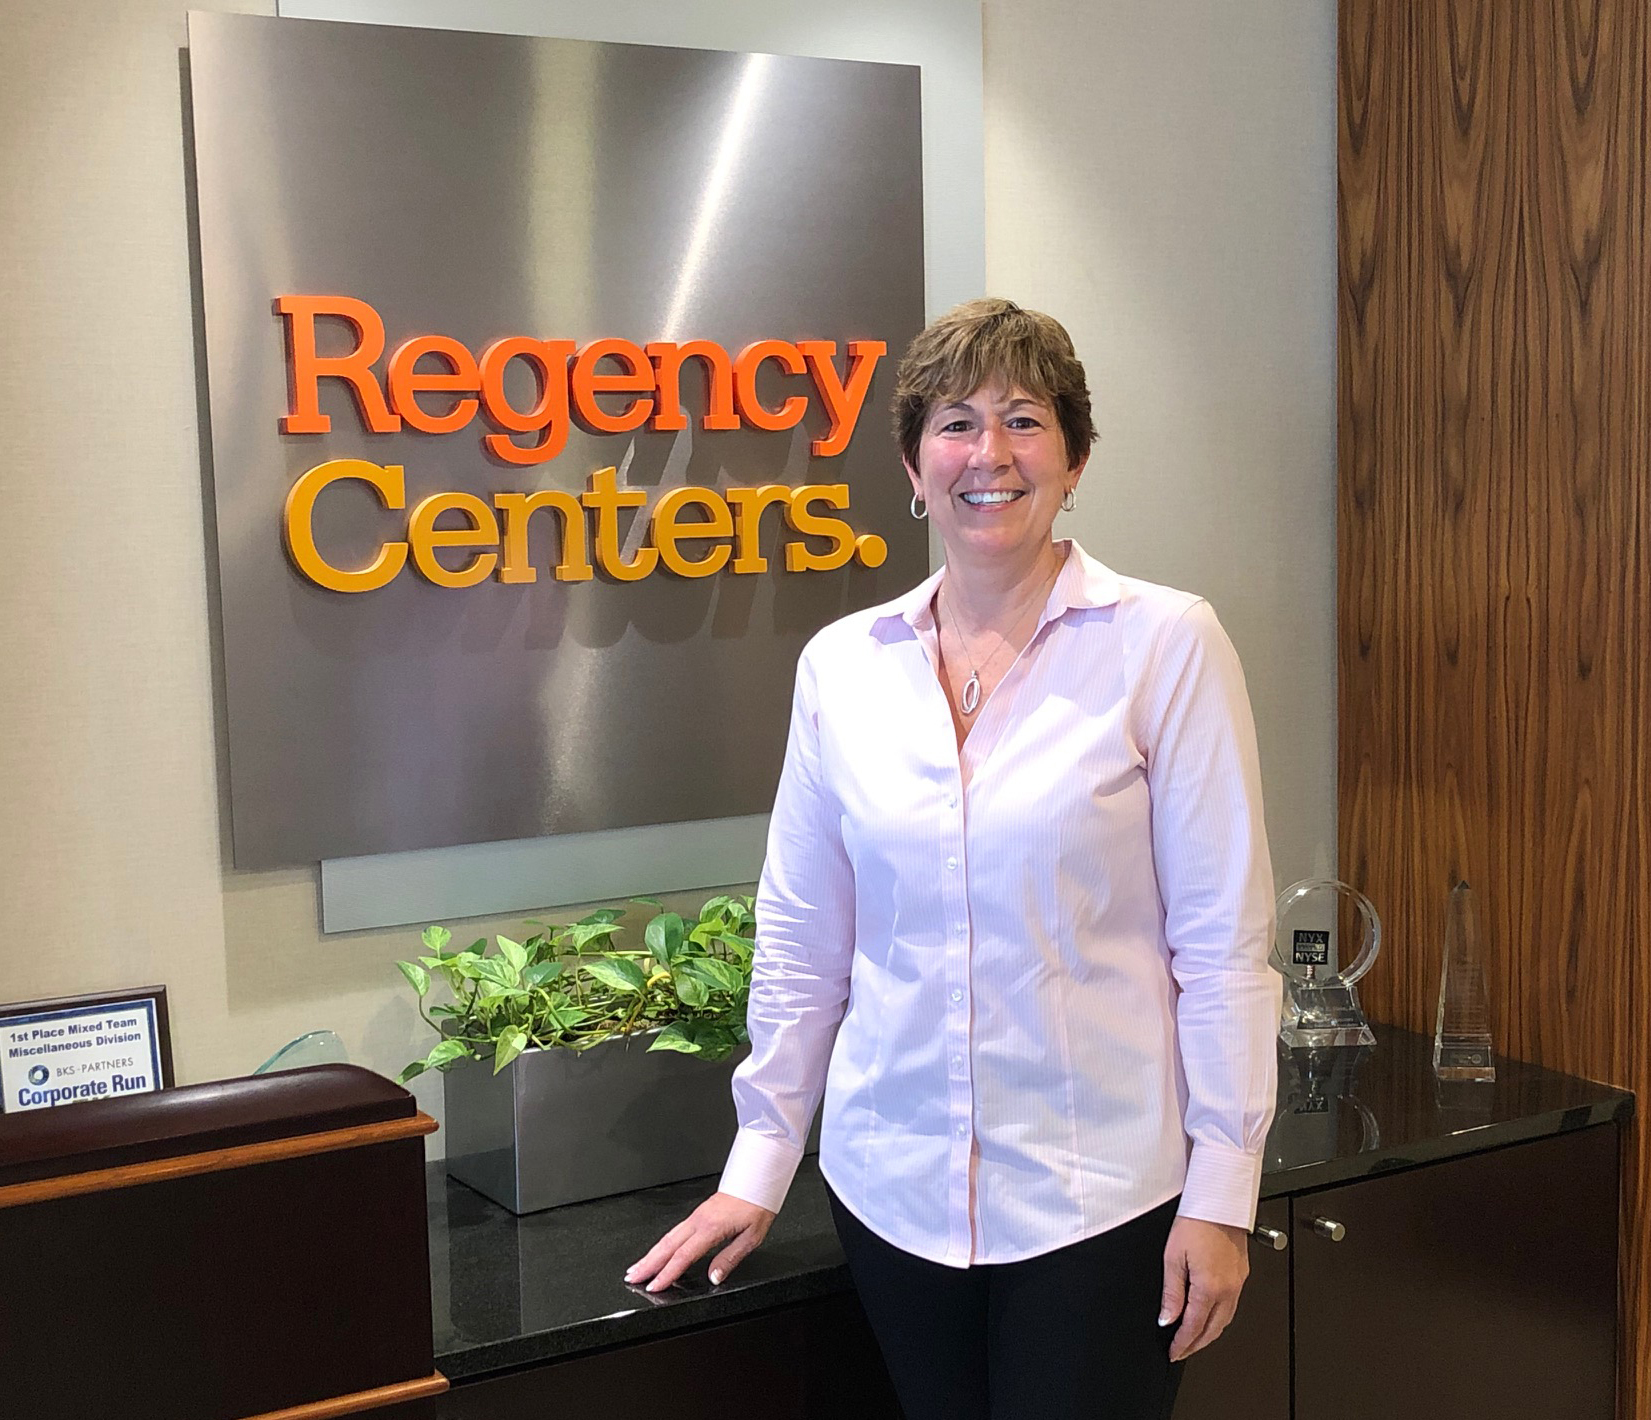 Palmer joined Regency in 1996 and worked her way up the ranks, becoming chief financial officer in January 2013 and president in January 2016.